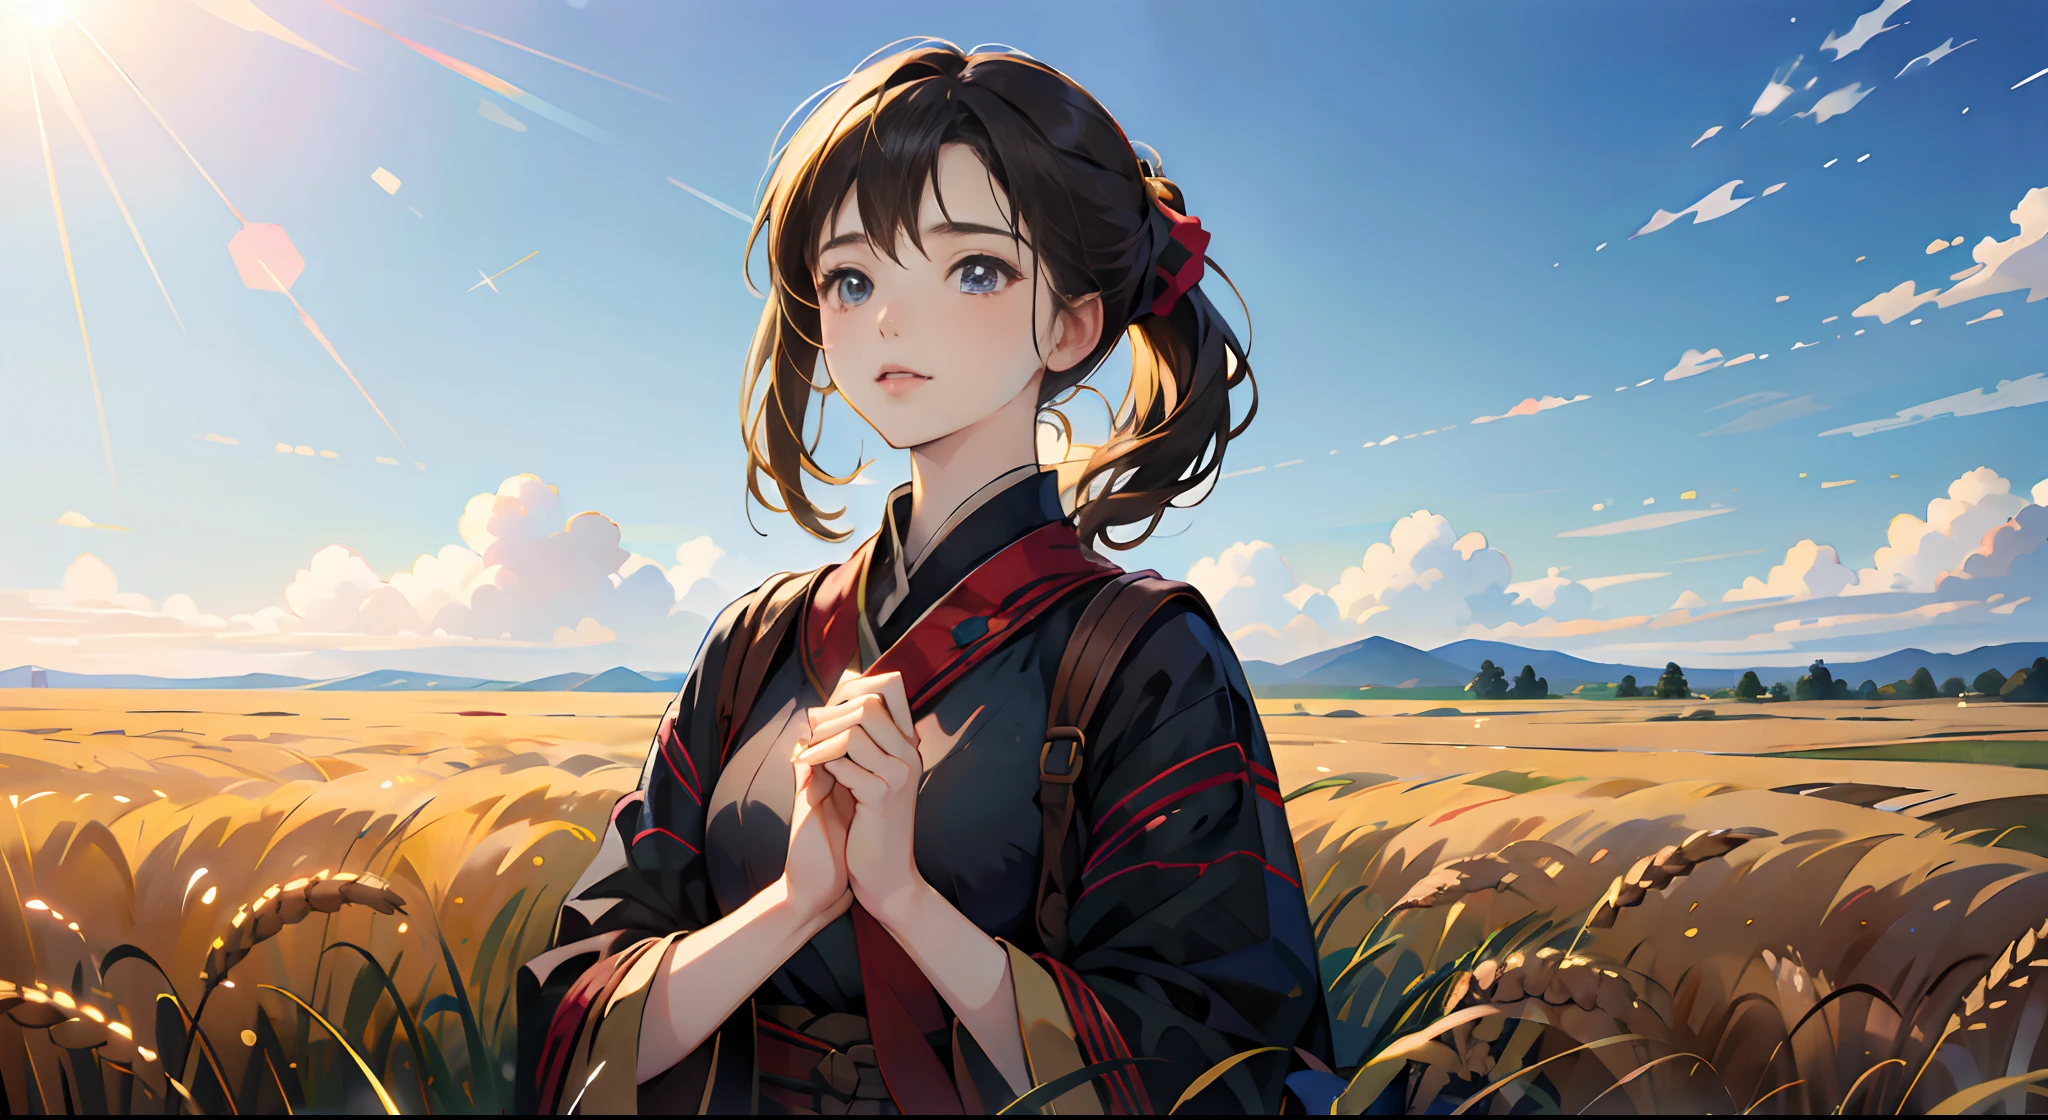 Fresh painting style，In the wheat field，girl with，Keep hands away from sunlight，Bright sky，Looking Up，Anime characters，ultra - detailed，Highly realistic，tmasterpiece，8K，hyper HD，